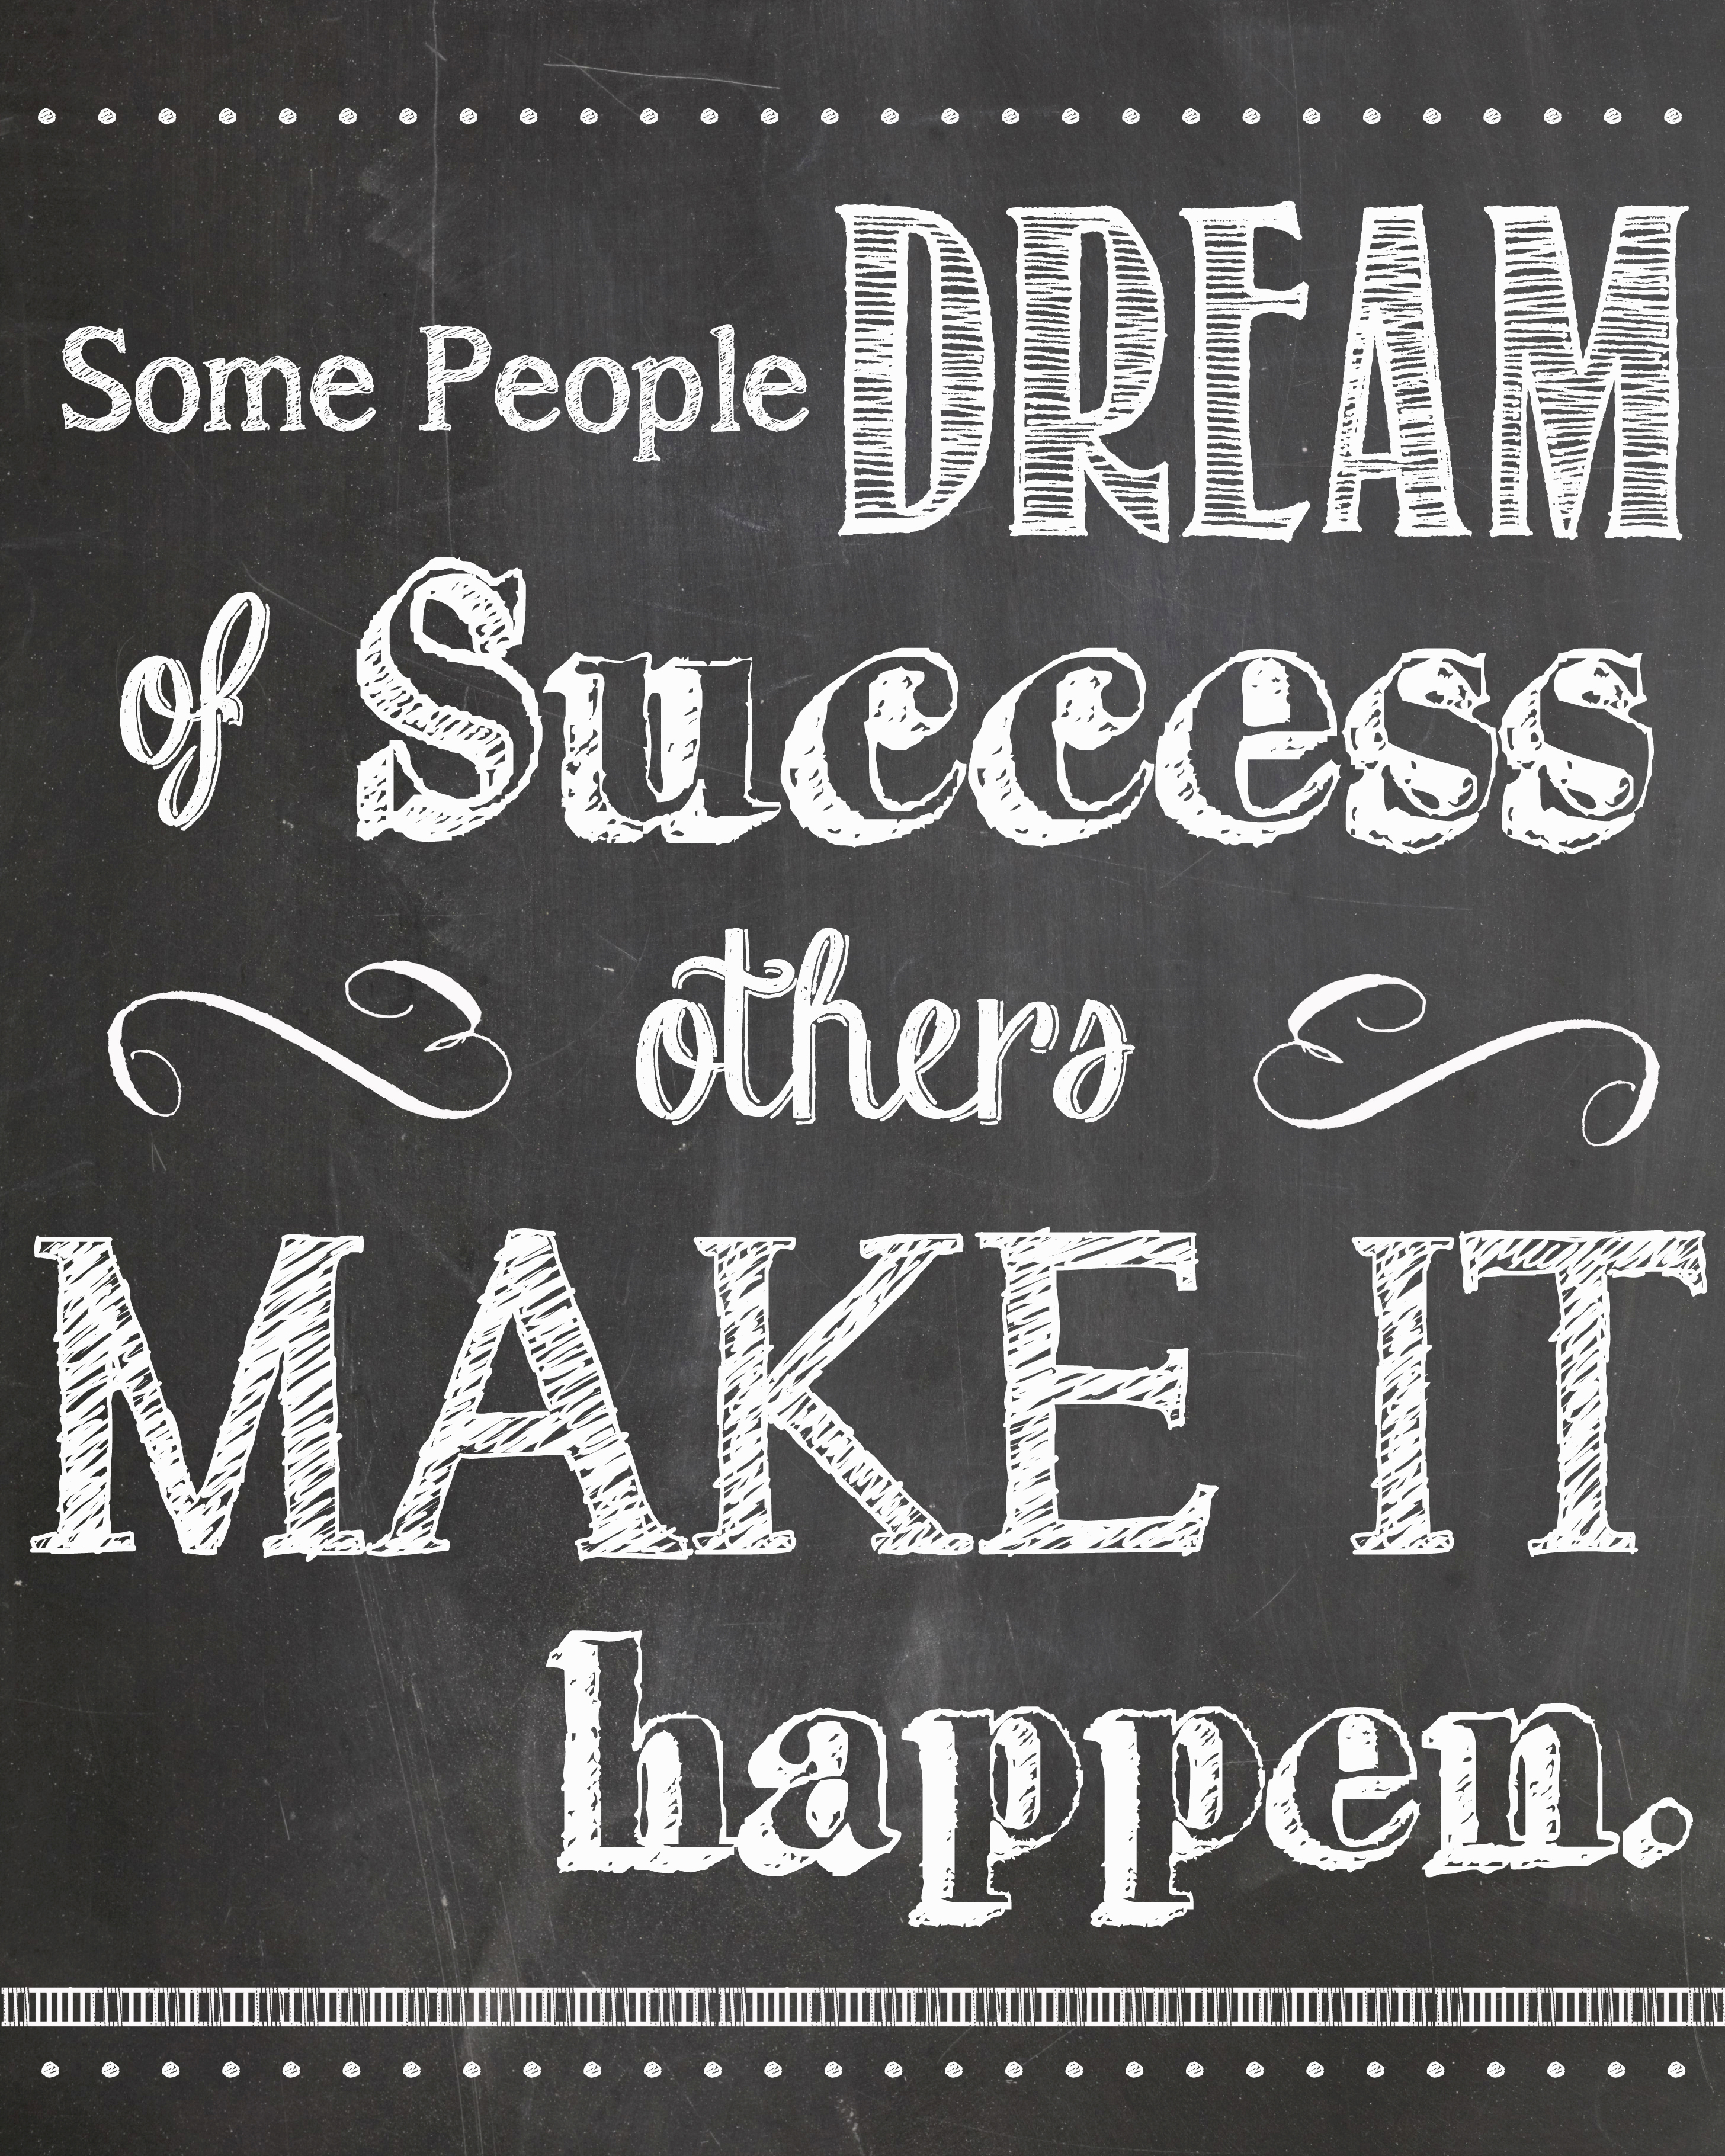 Make is happen. Some people. It happened to me бренд. Chalk up success. Make your happen